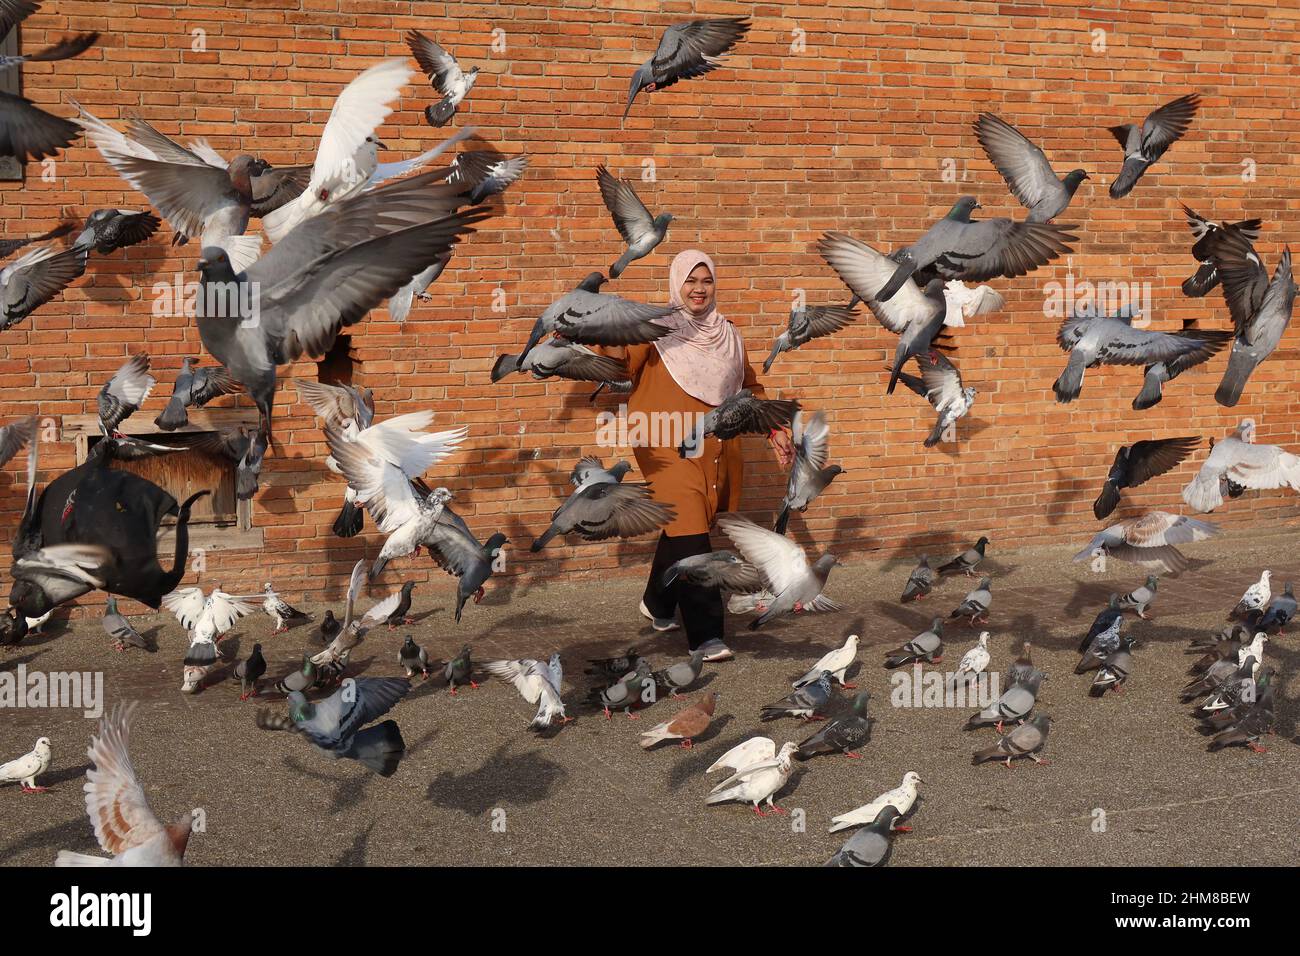 Thai Muslim woman smiling with Pigeons flying  in front of the Tha Phae gate, Chiang Mai, Thailand Stock Photo